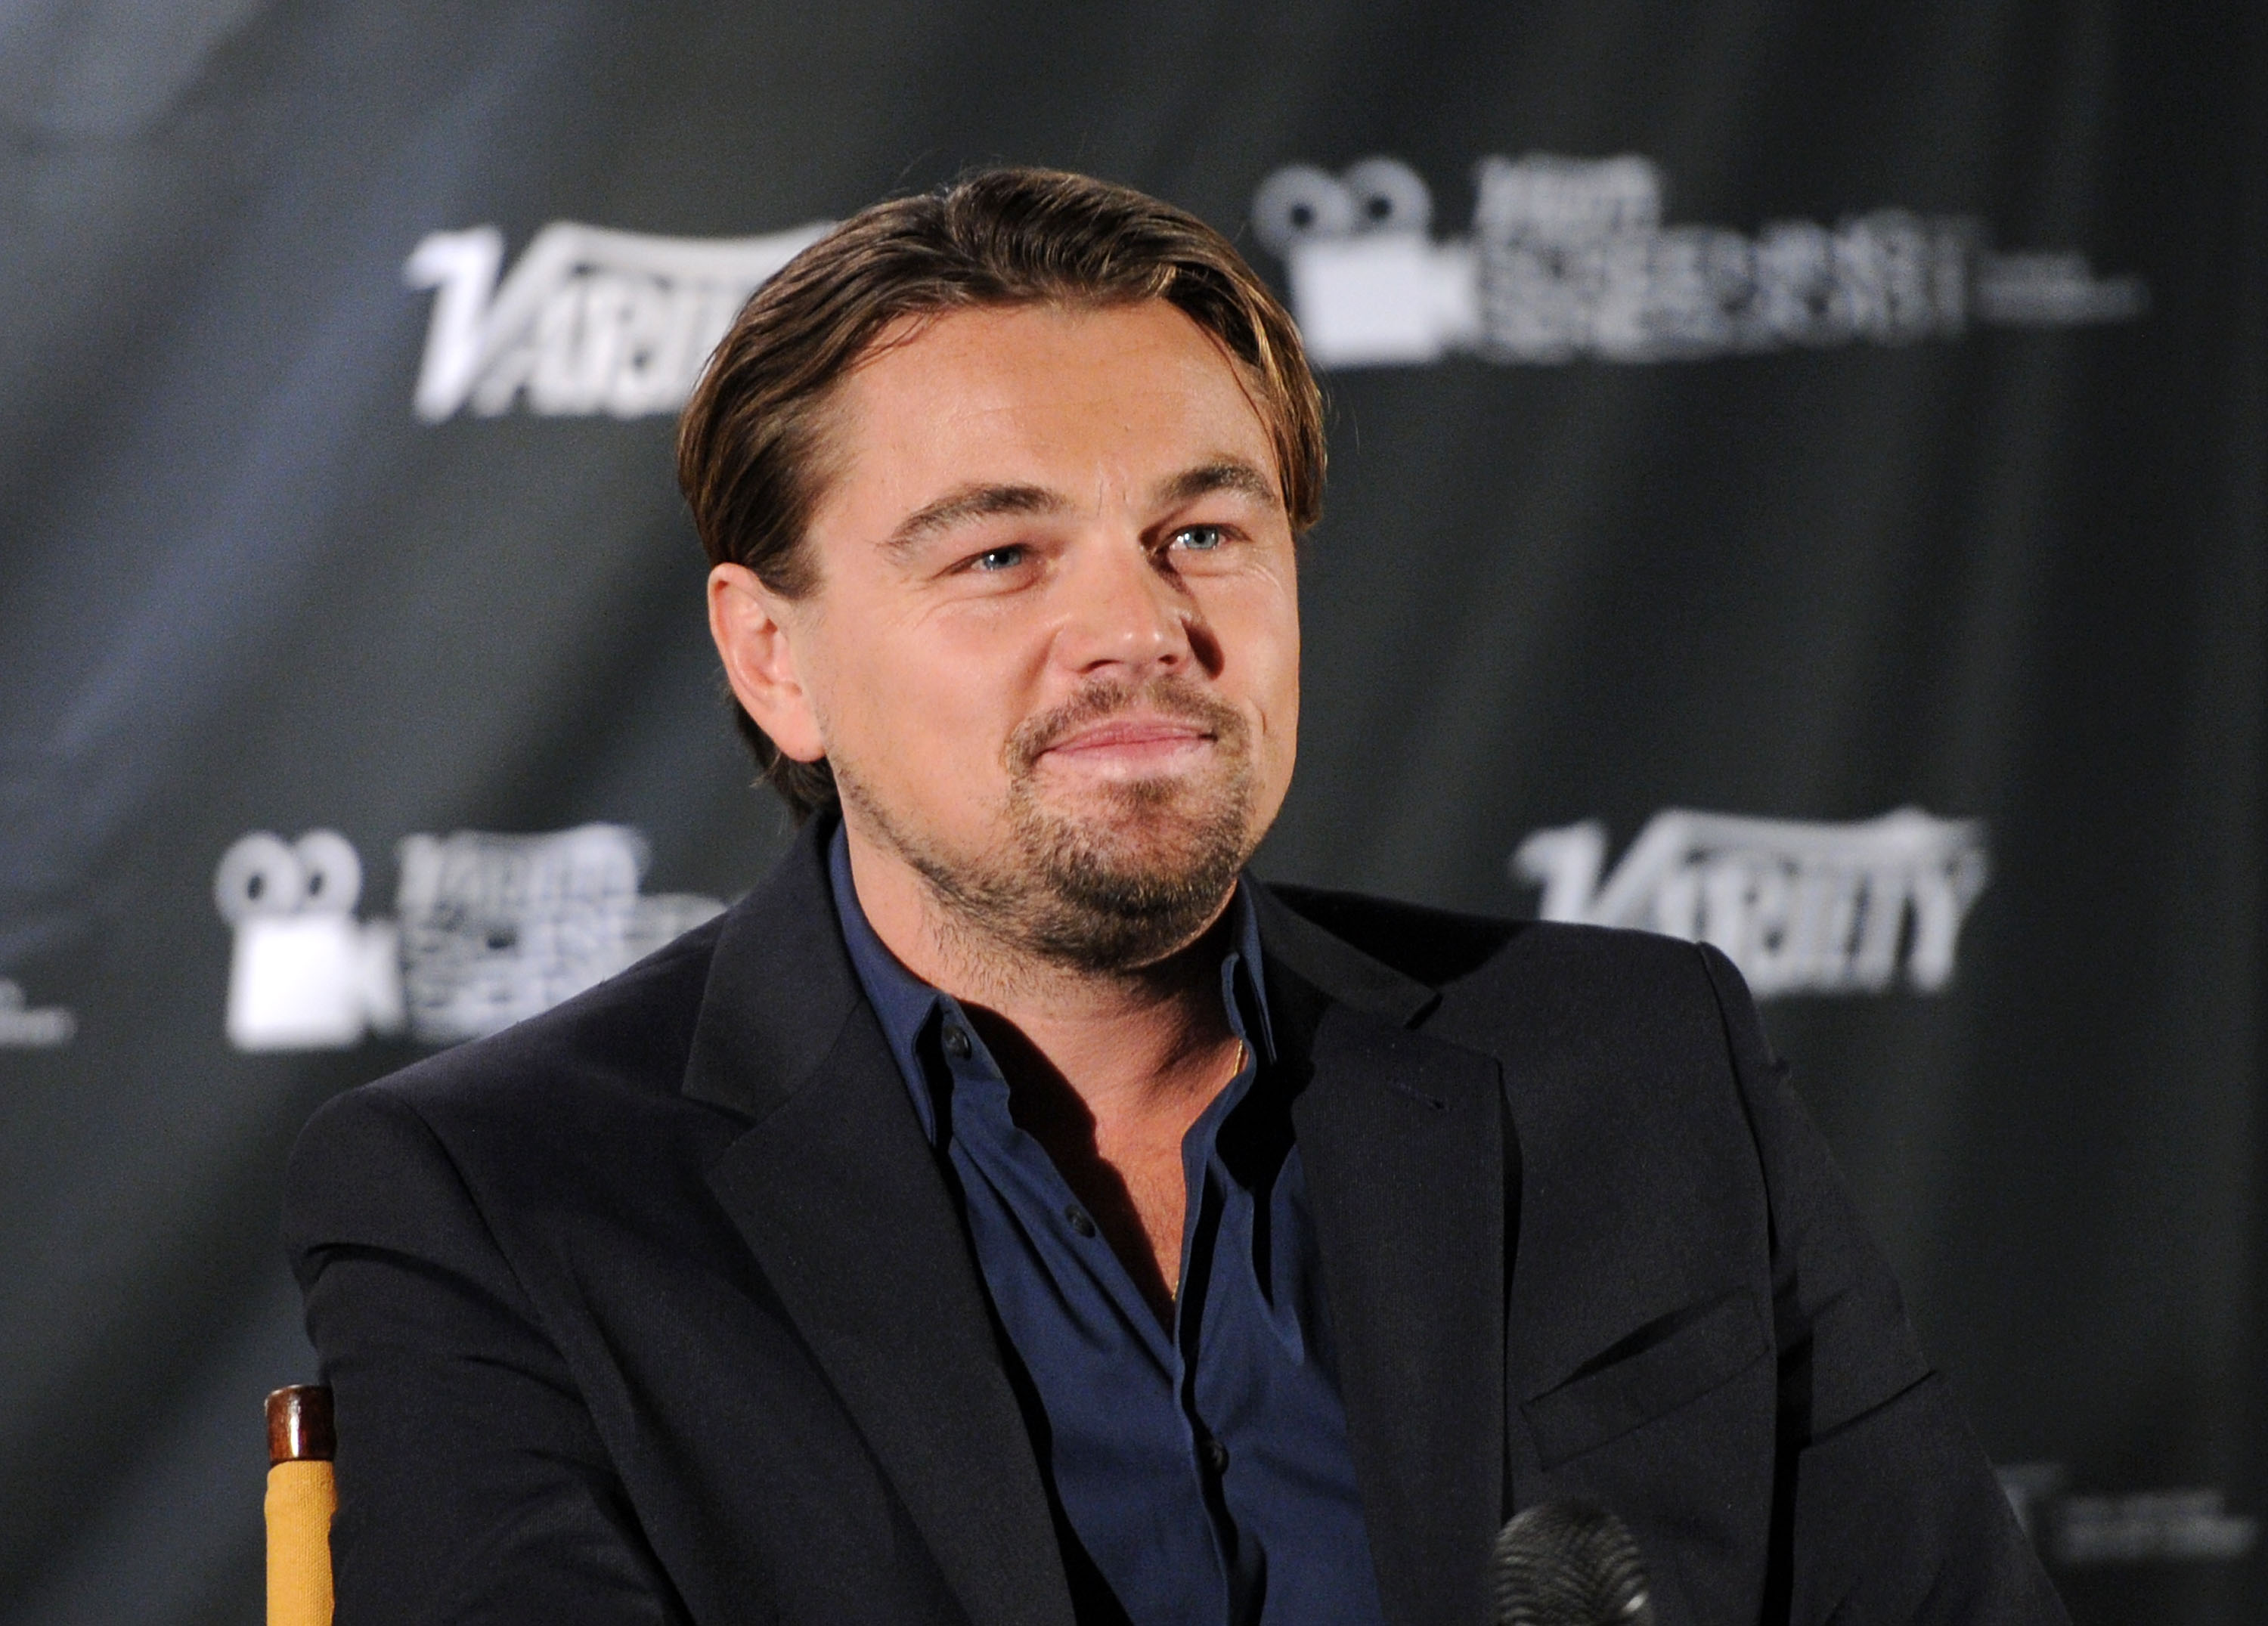 Leonardo DiCaprio at the Variety Screening of "The Wolf Of Wall Street" on February 4, 2014, in New York City | Source: Getty Images